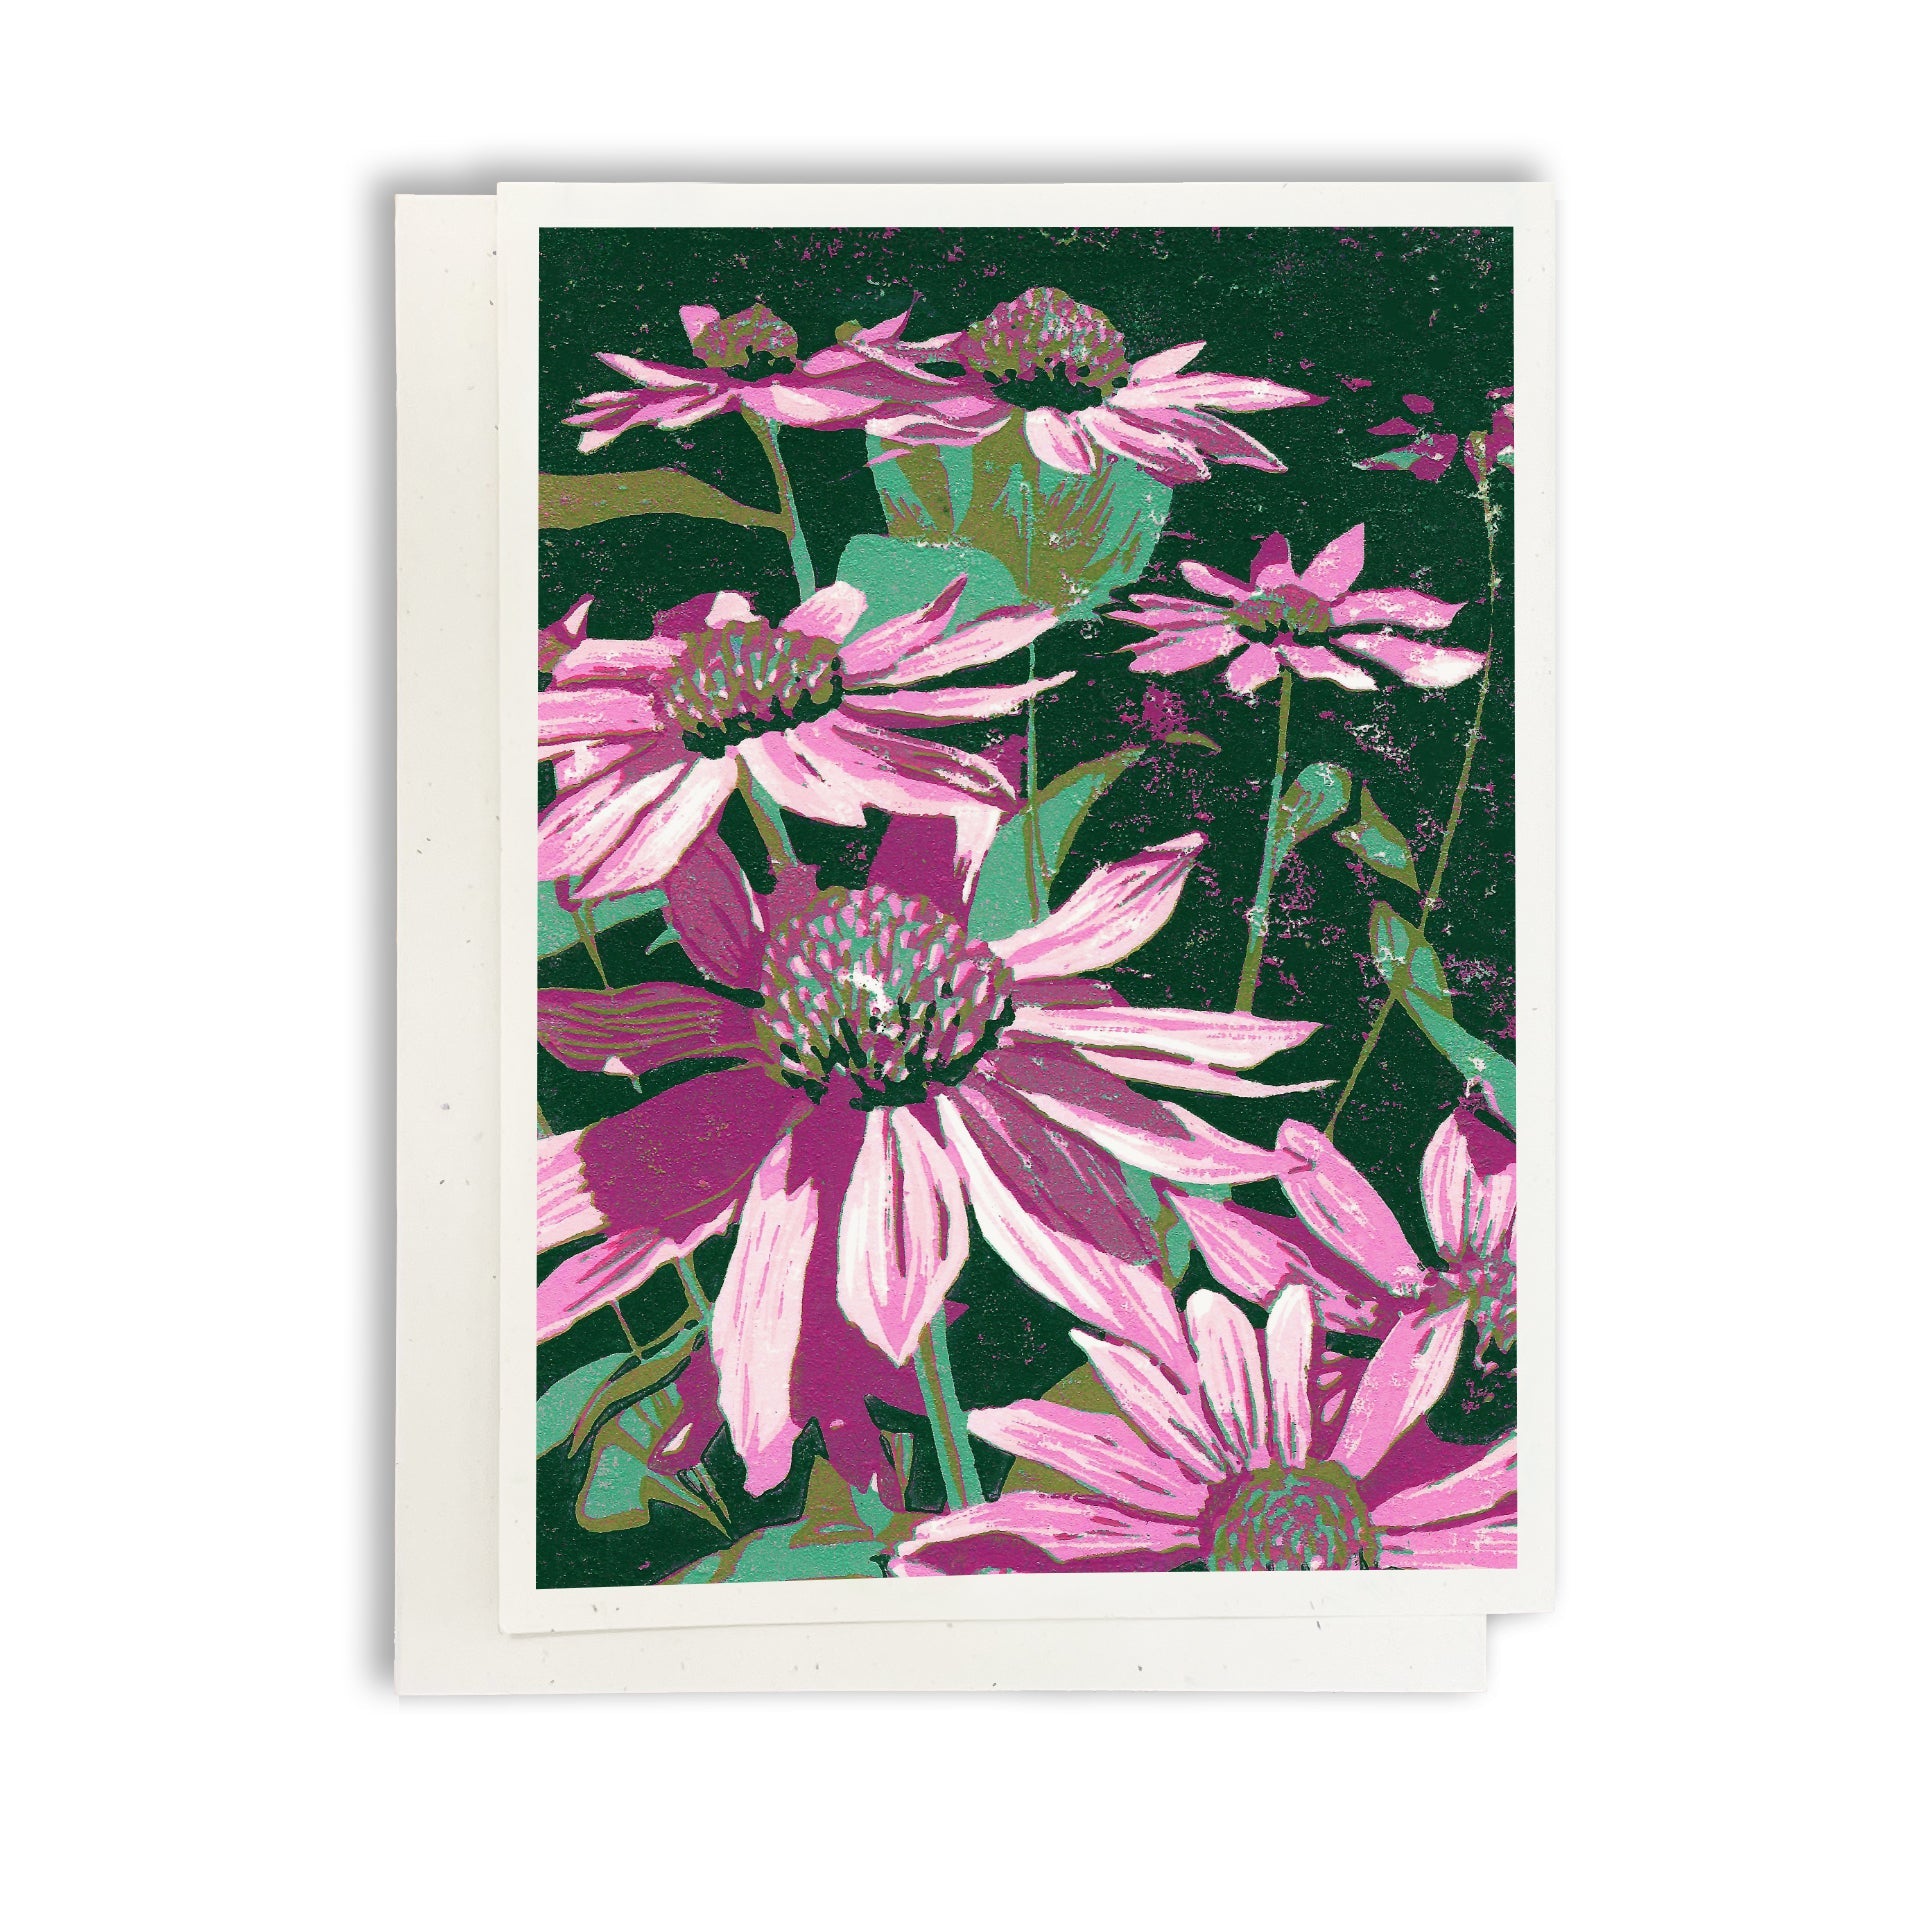 A casually elegant card featuring floral art by Natalia Wohletz titled Echinacea.